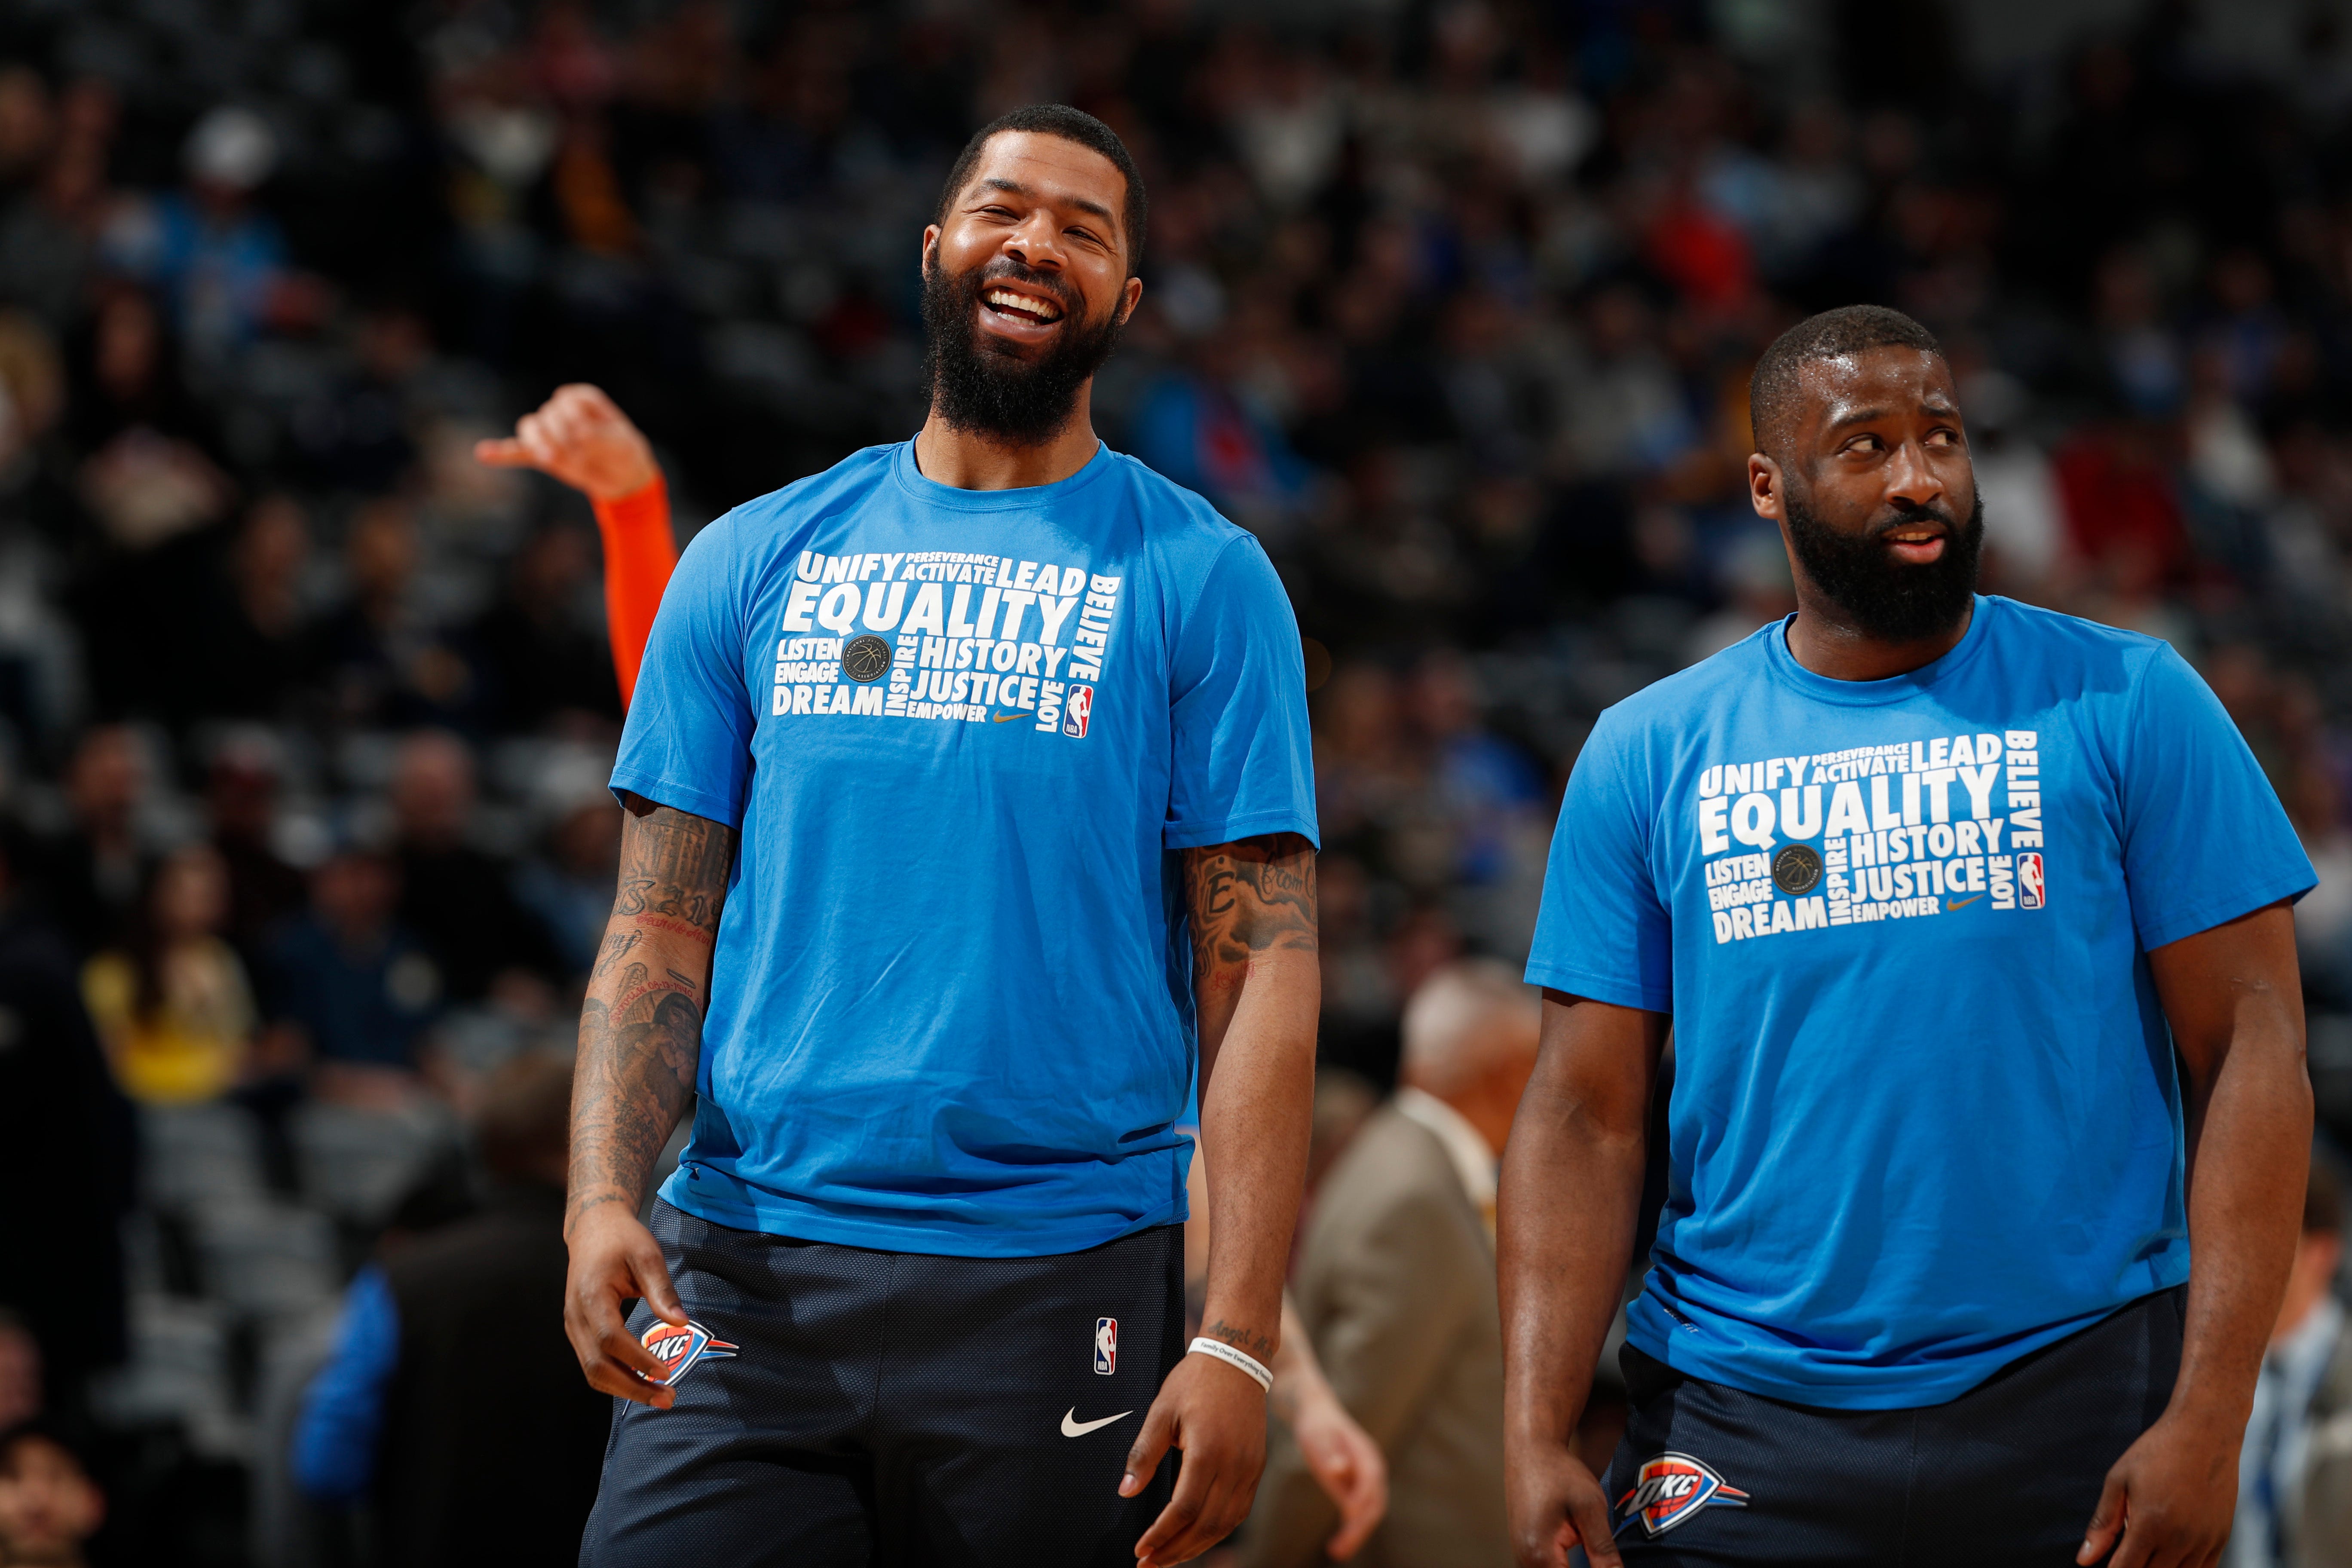 11. PF Markieff Morris, age 29: A free-agent addition, Morris brings a combination of toughness and inside presence that the Pistons lacked in the playoffs last season. He didn’t have a scintillating finish with the Thunder, which made him available for a lower price this summer, and the Pistons pounced on the opportunity. If he gets back to where he was in 2017, he could be a steal in free agency.